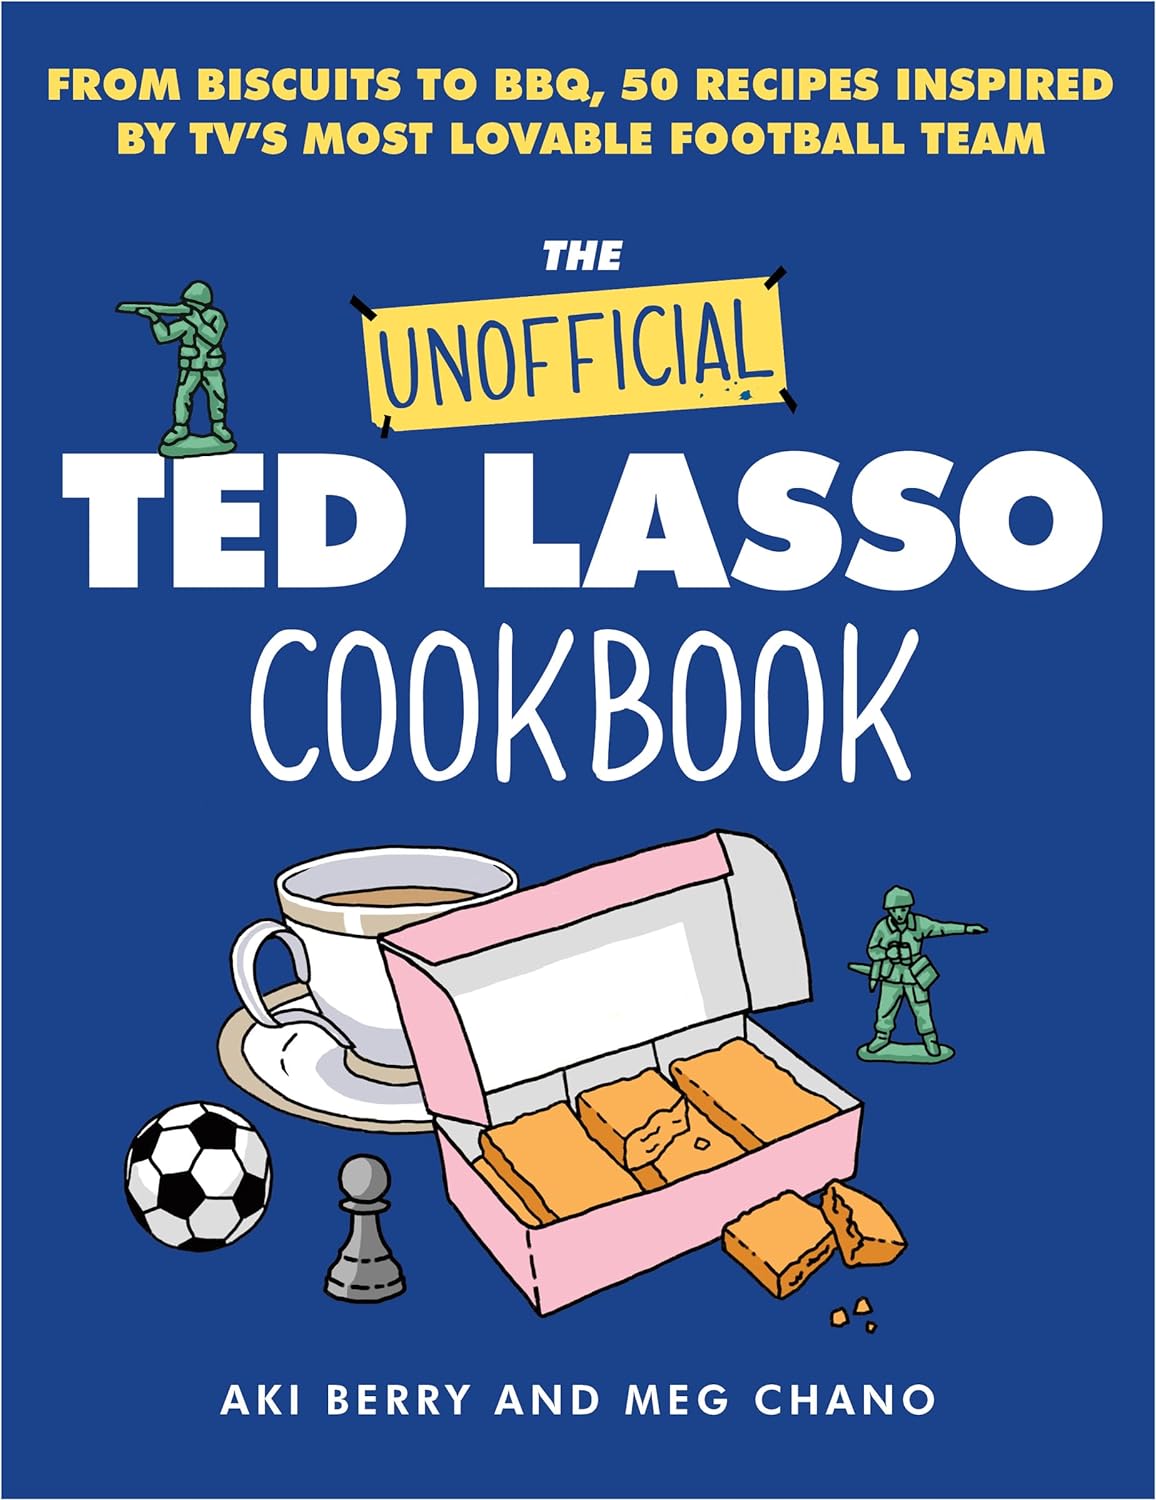 The Unofficial Ted Lasso Cookbook: From Biscuits to BBQ, 50 Recipes Inspired by TV's Most Lovable Football Team